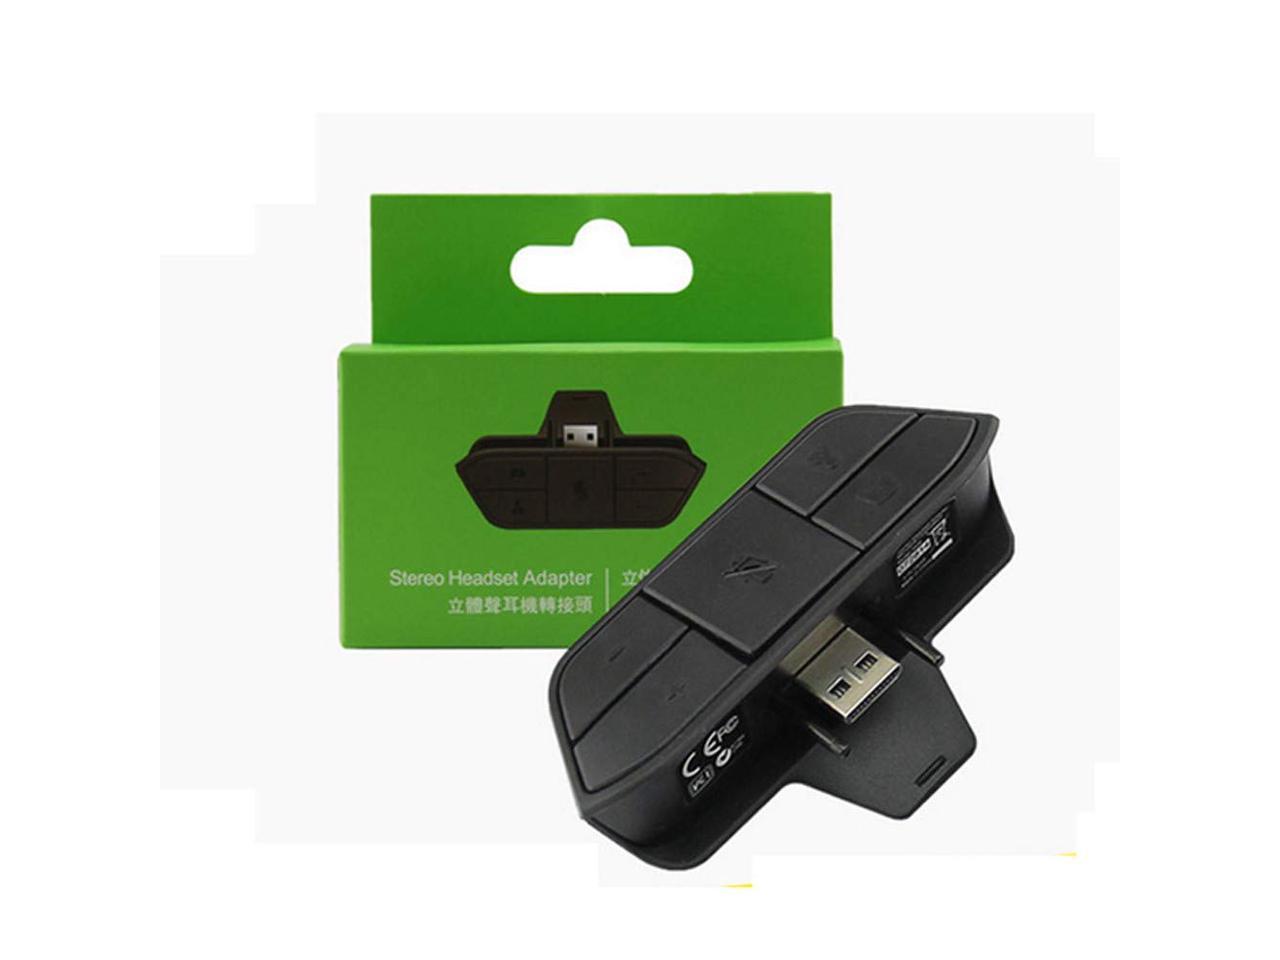 xbox controller adaptor for headset